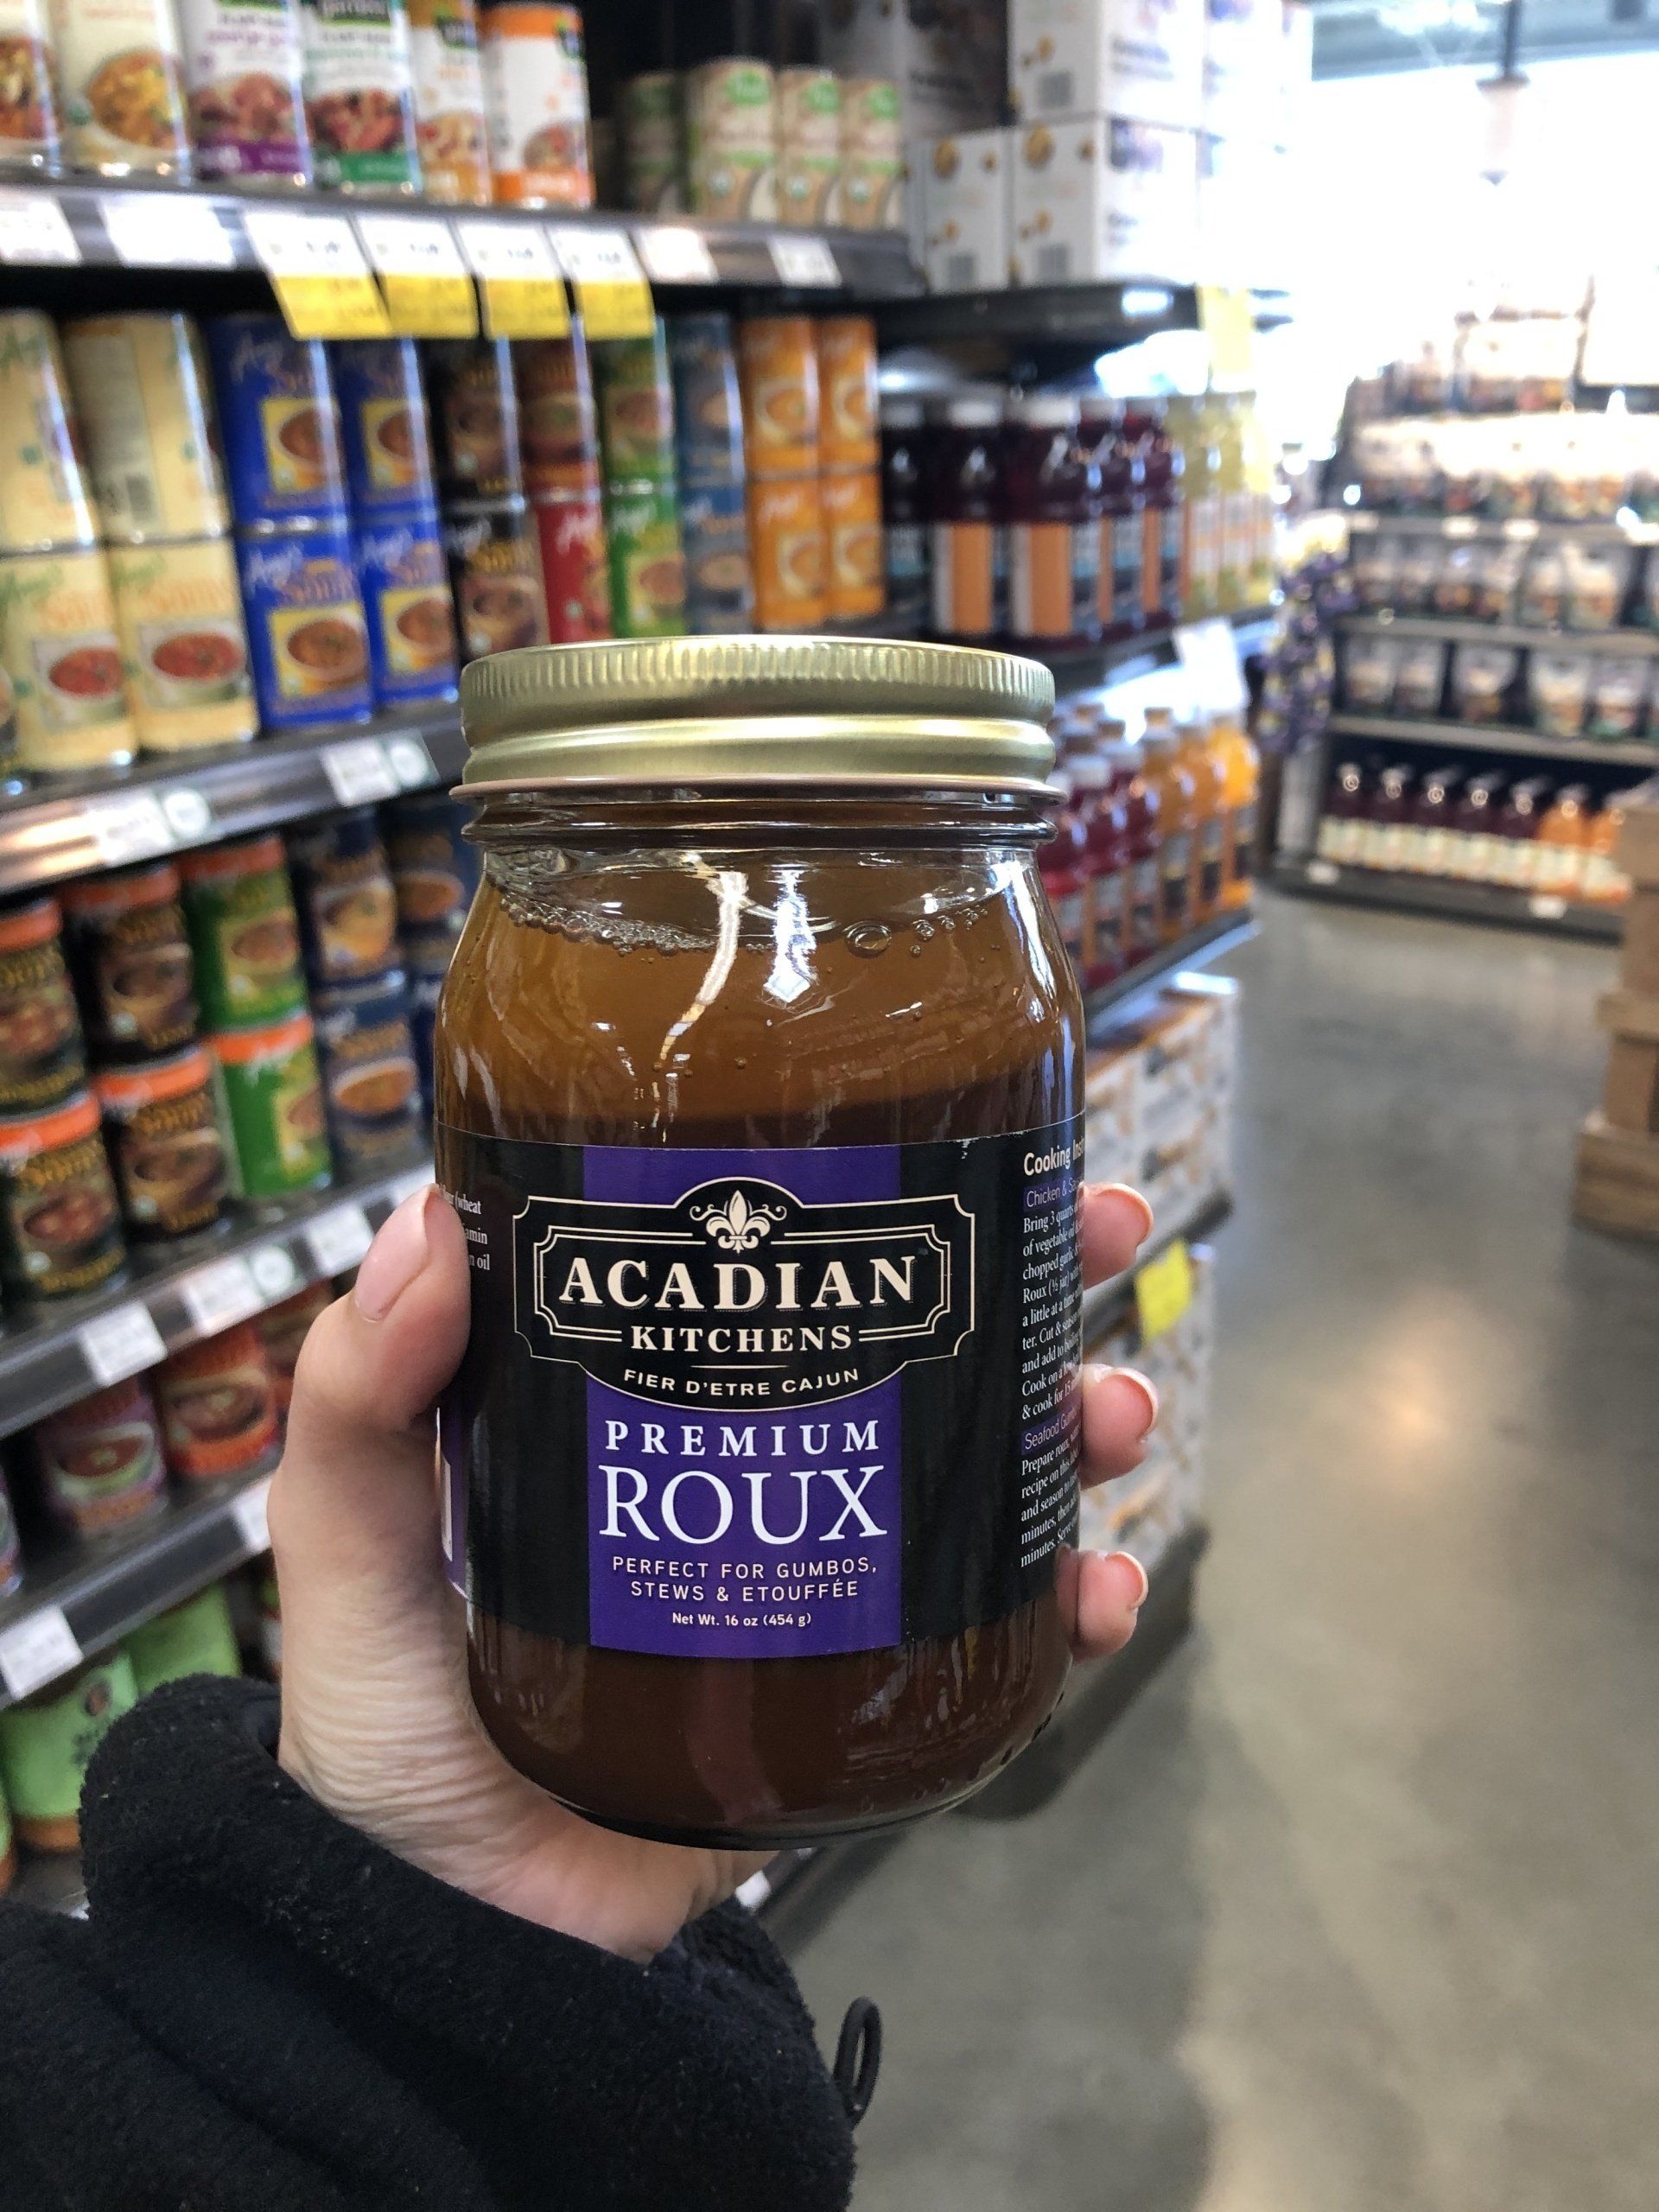 Acadian Kitchens® Premium Roux Launching in Whole Foods